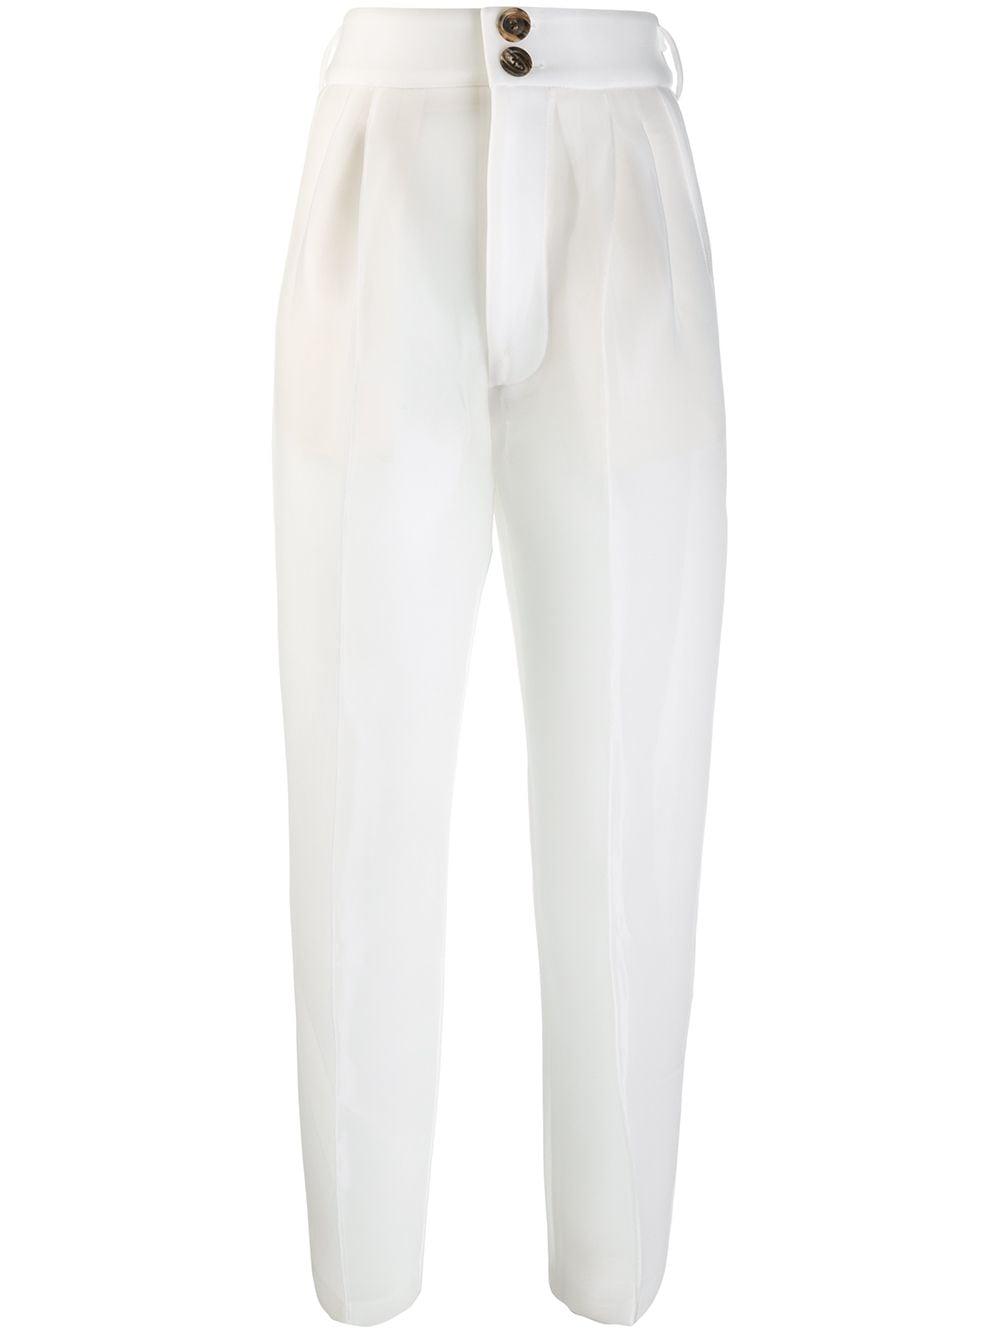 Peter Do Transparent Trousers in White | Lyst